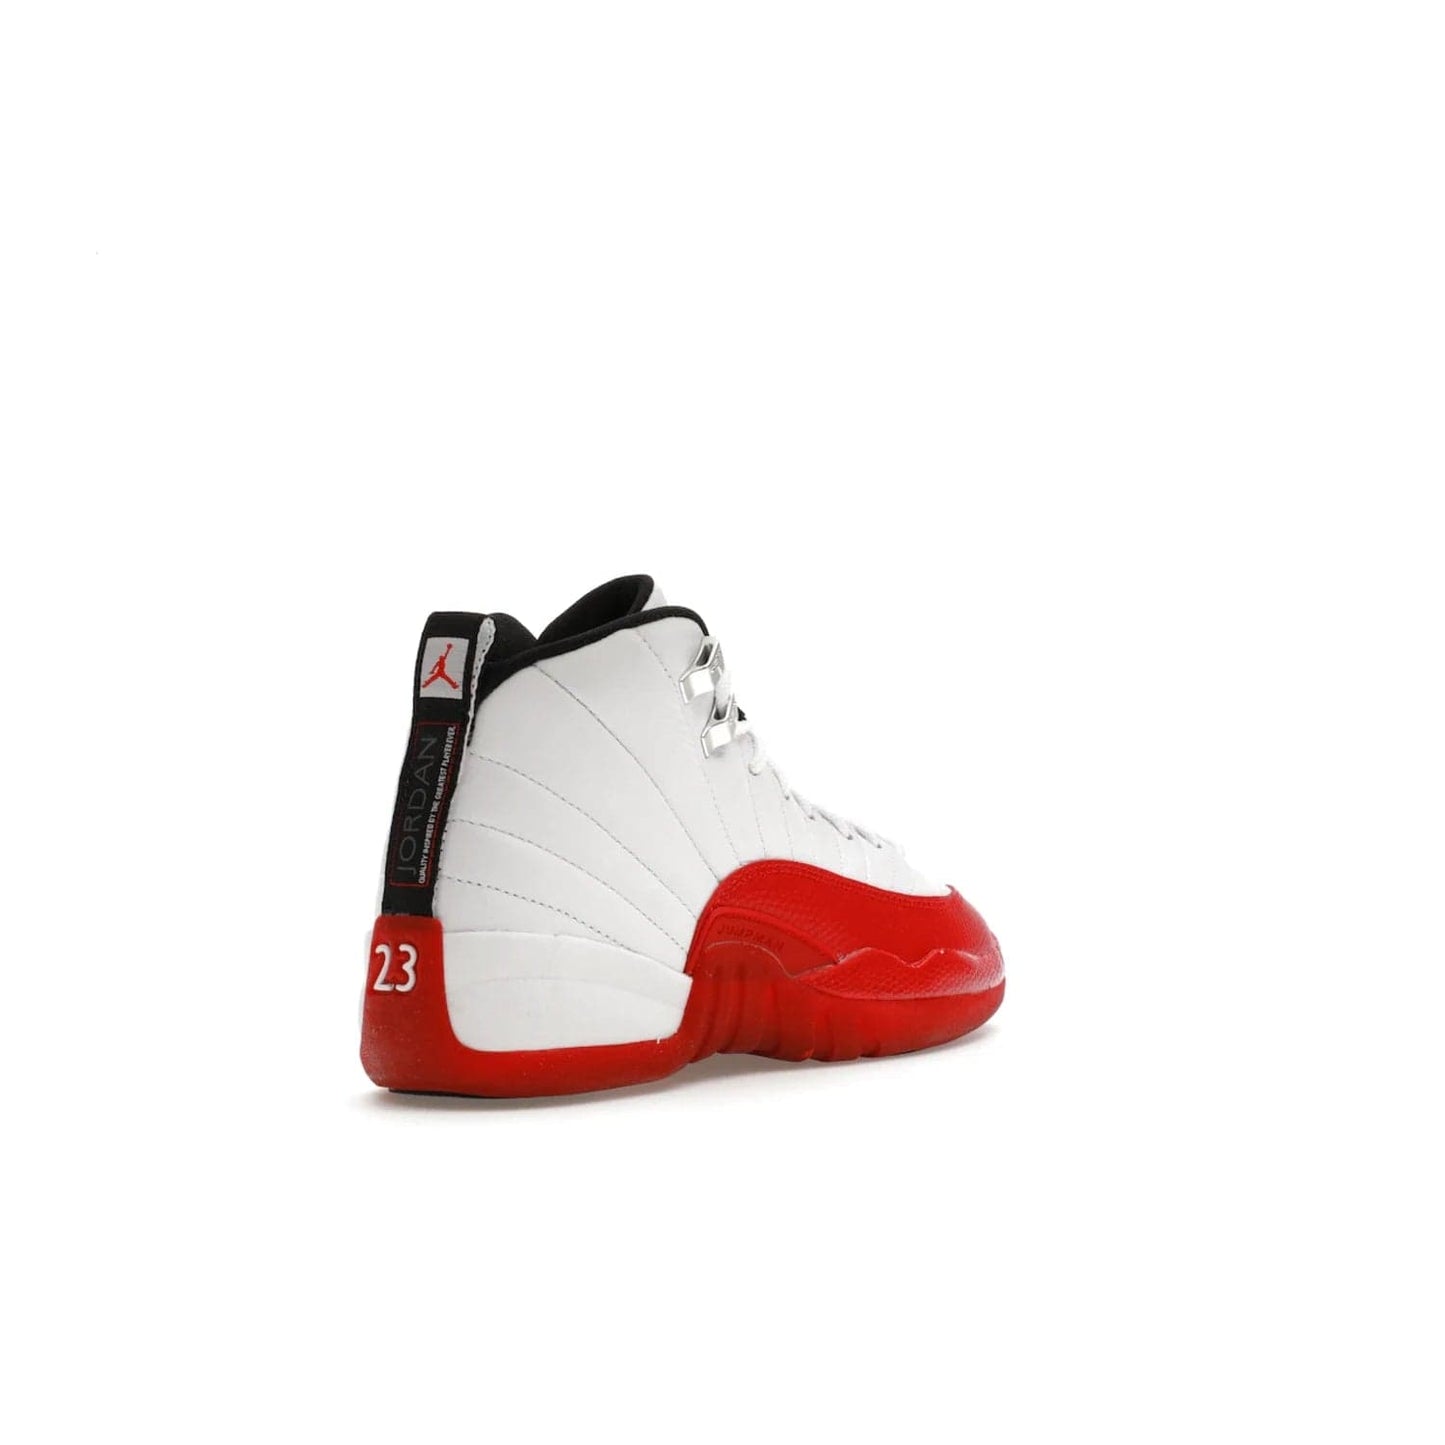 Jordan 12 Retro Cherry (2023) (GS) - Image 32 - Only at www.BallersClubKickz.com - Grab the Jordan 12 Retro Cherry (2023) (GS) and show off your signature style with these iconic kicks. Dressed in White, Black and Varsity Red, these timeless kicks are sure to turn heads. Available October 28, 2023.